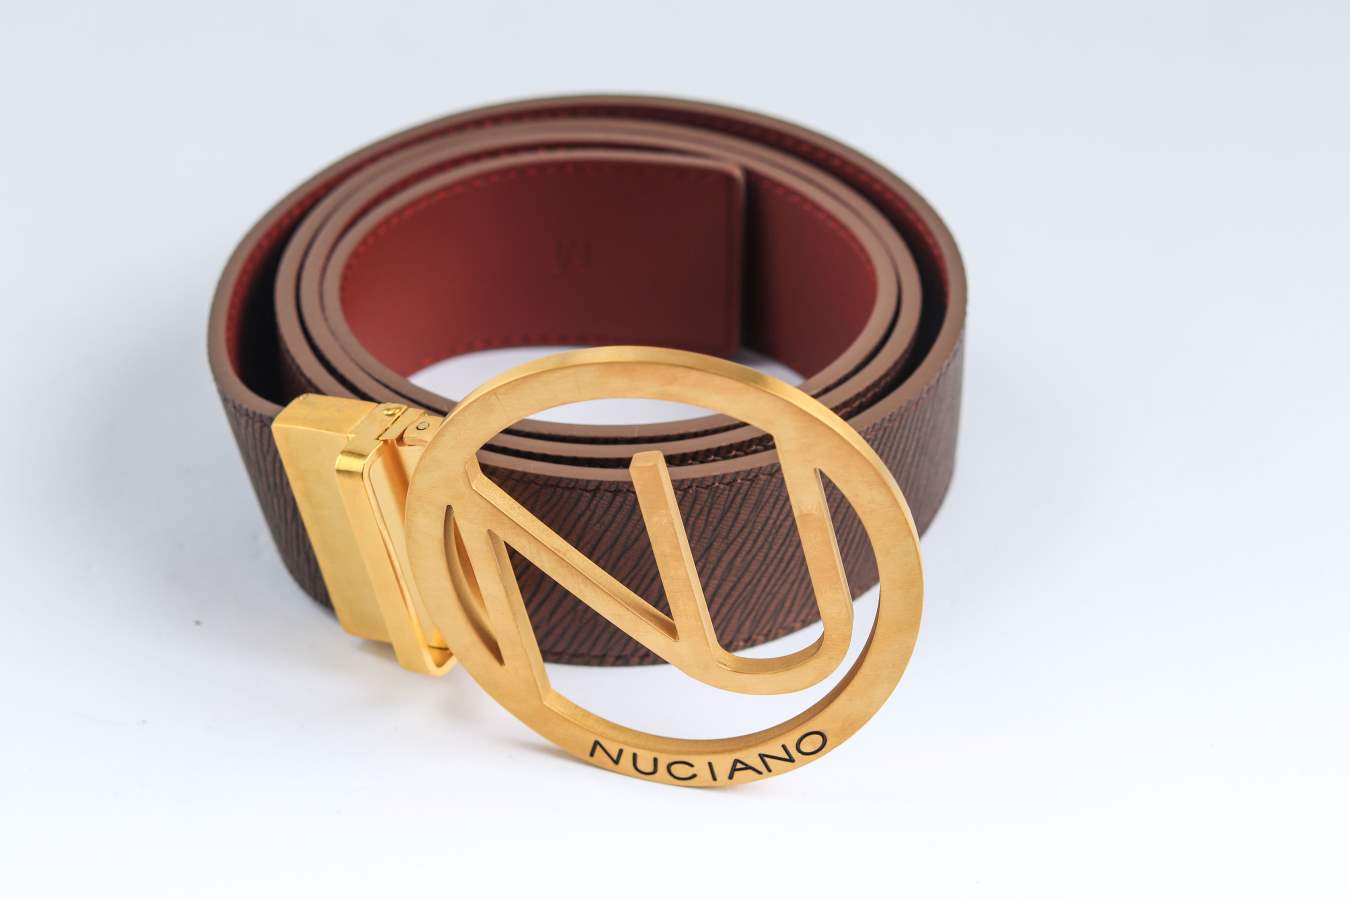 Reversible belt in burgundy leather and burgundy nubuck - Clint